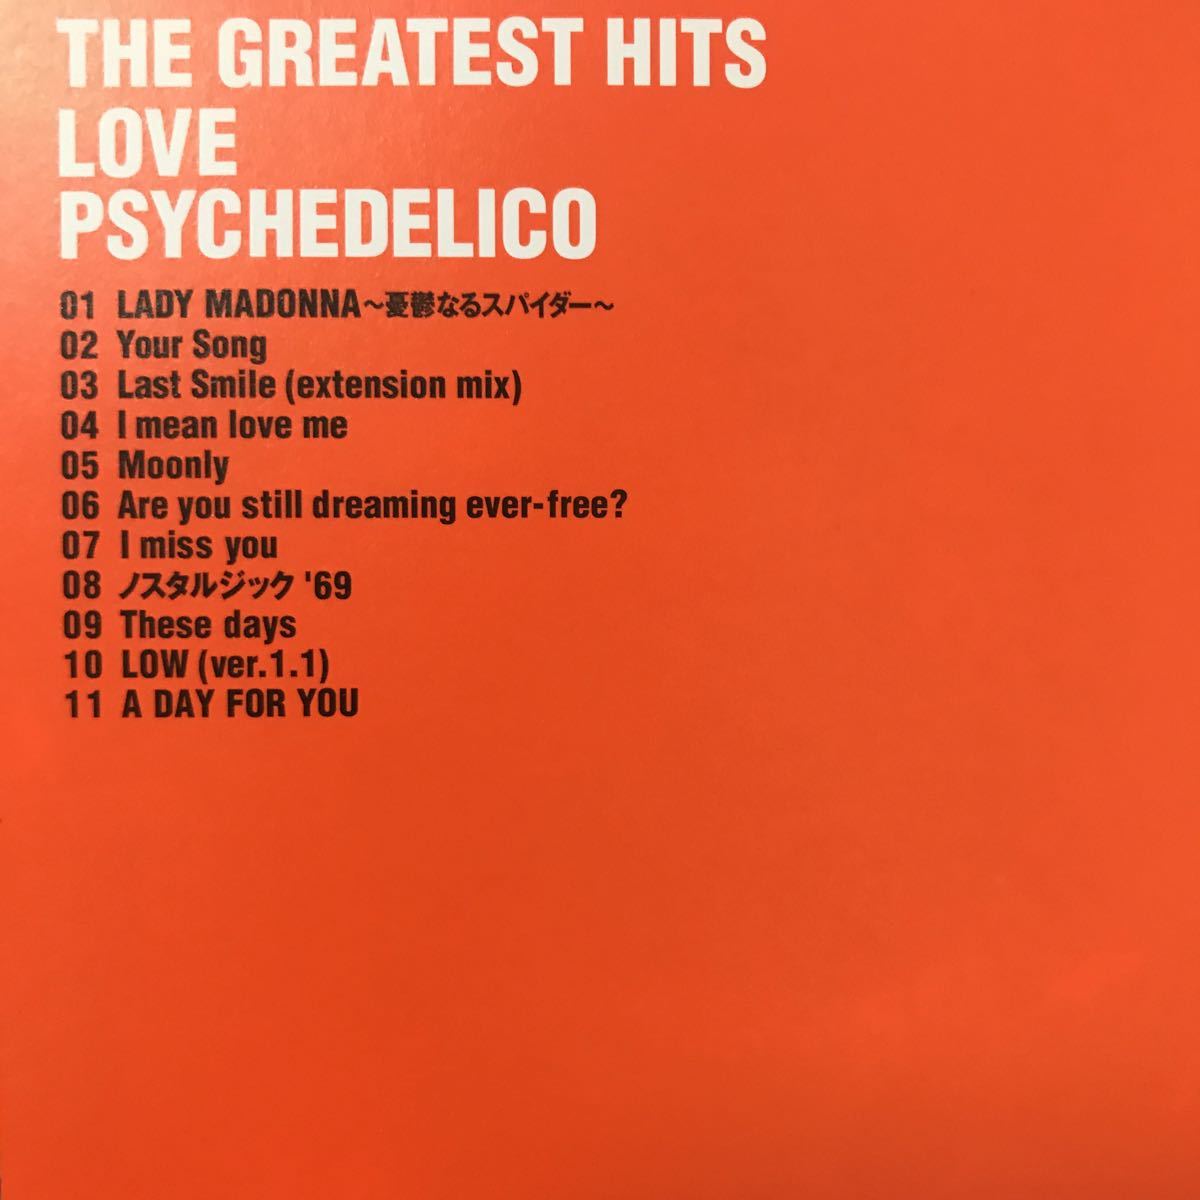 LOVE PSYCHEDELICO ★ THE GREATEST HITSの画像3